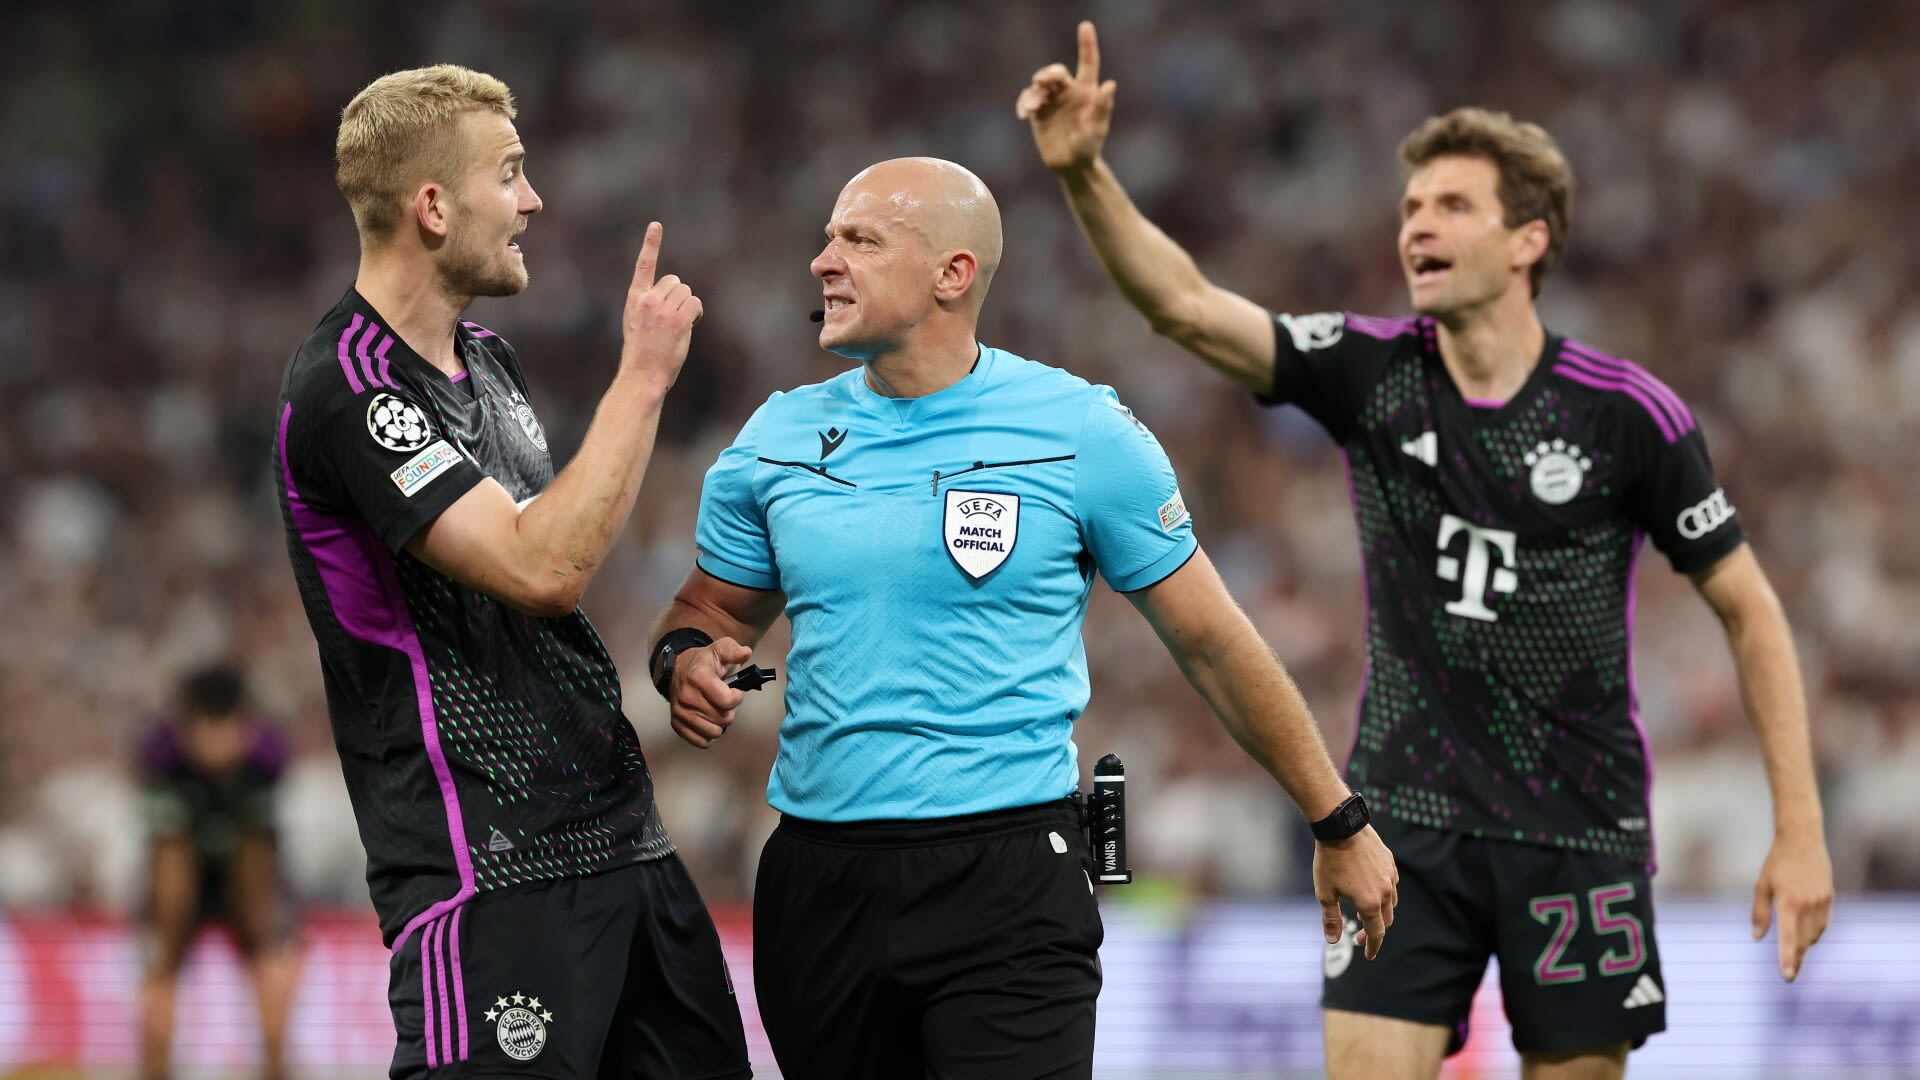 Matthijs de Ligt: Linesman apologized for offside call in Champions League semi — 'Big mistake, big disgrace'